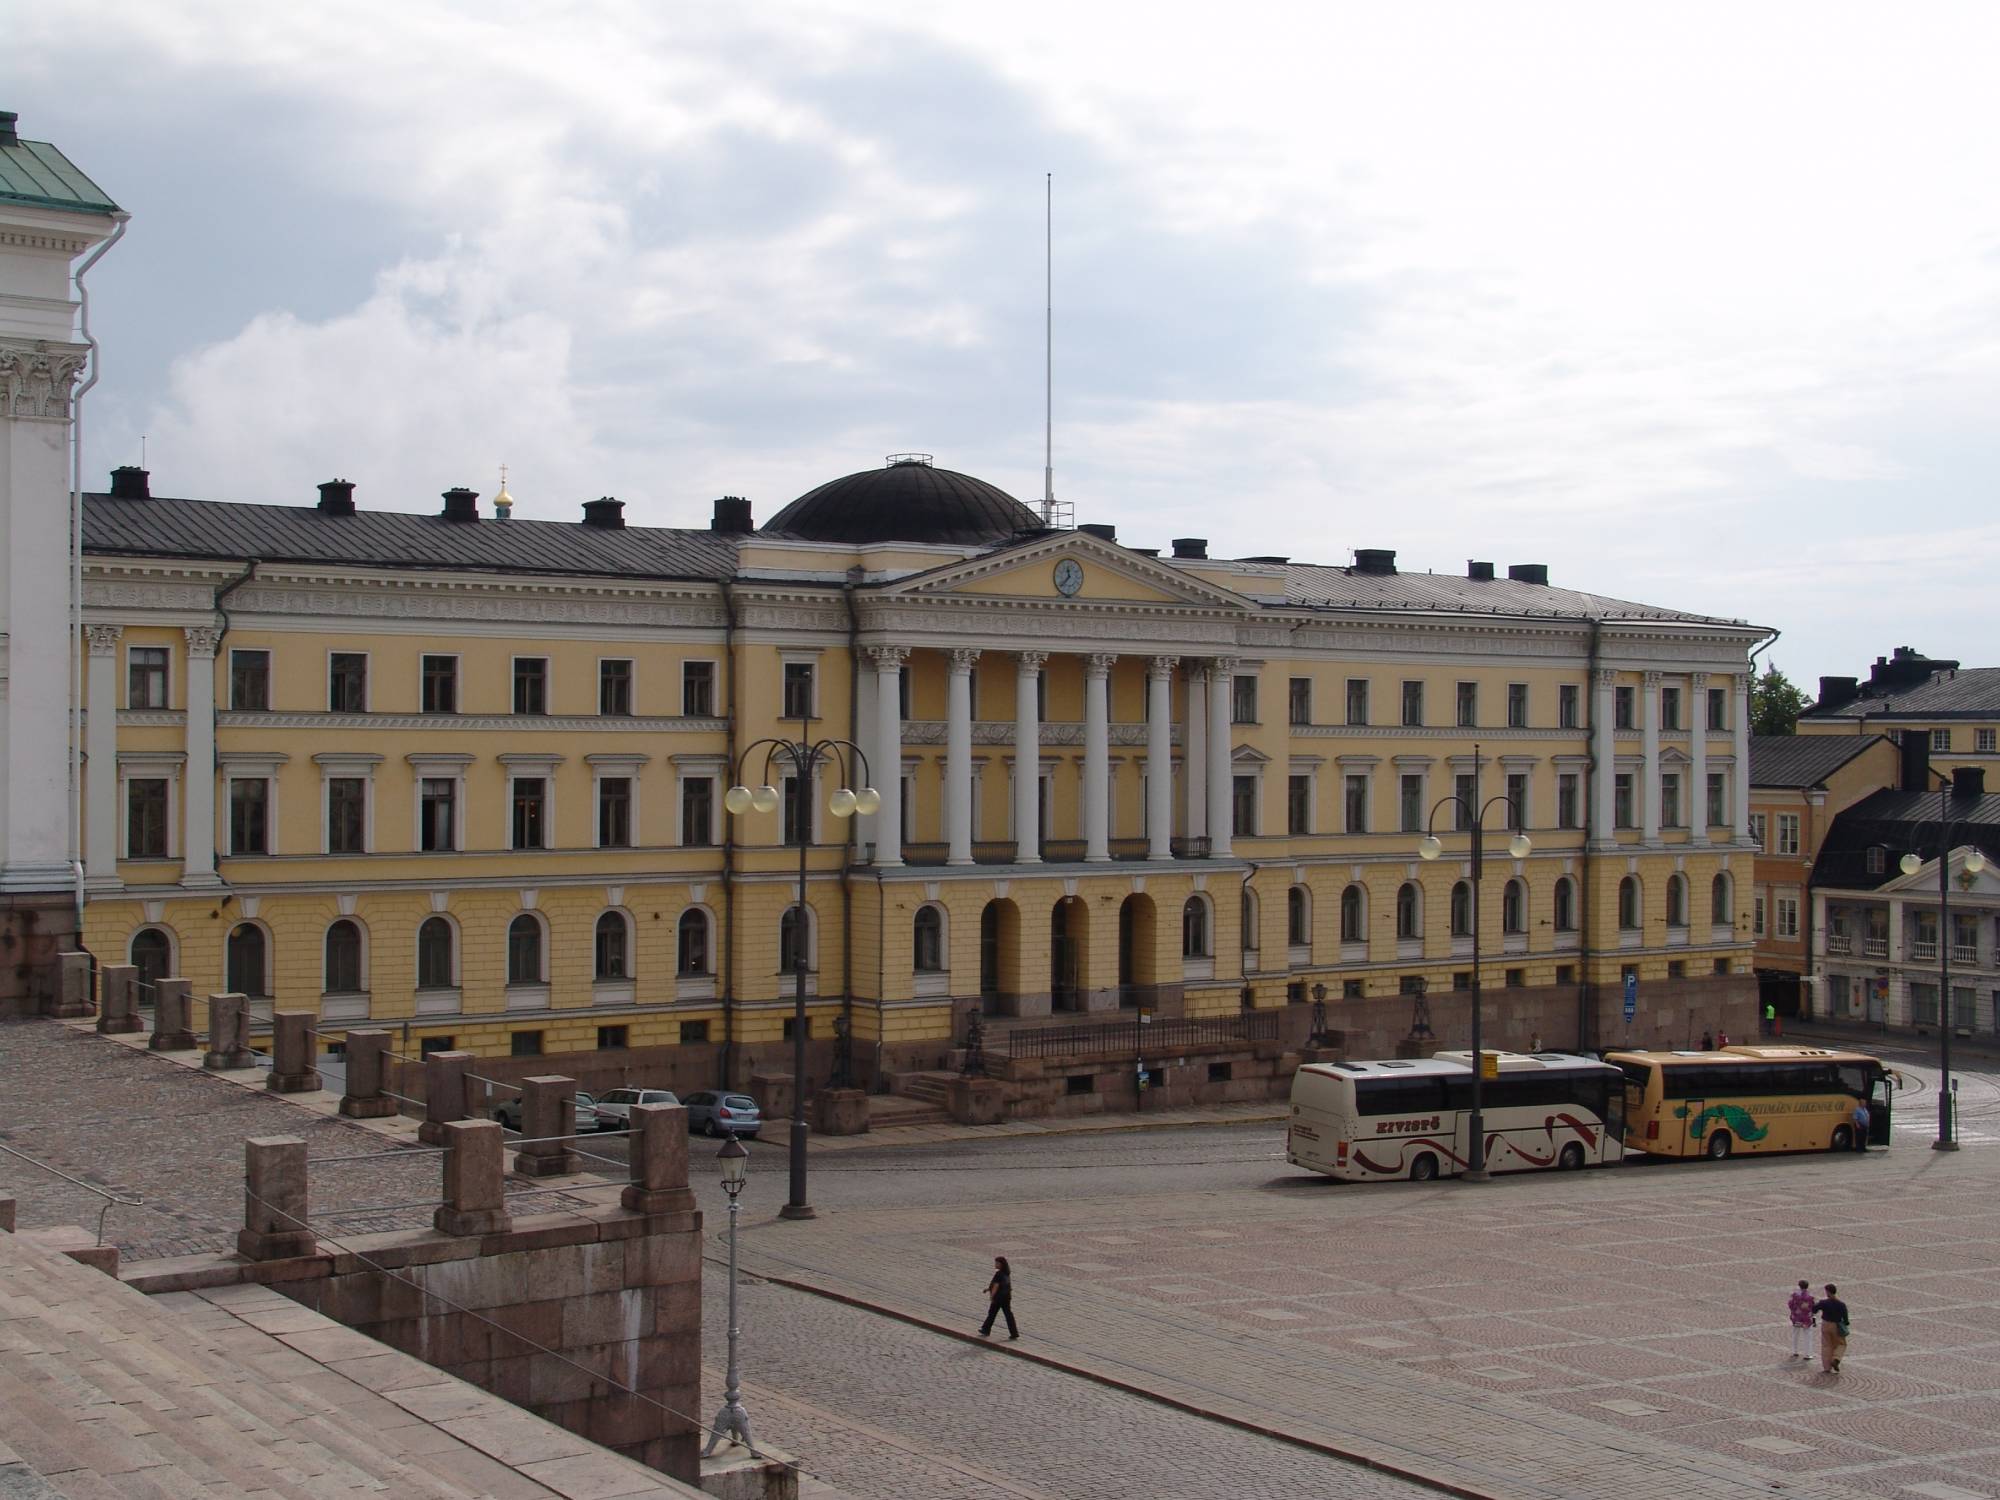 Helsinki - Palace of the Council of the State